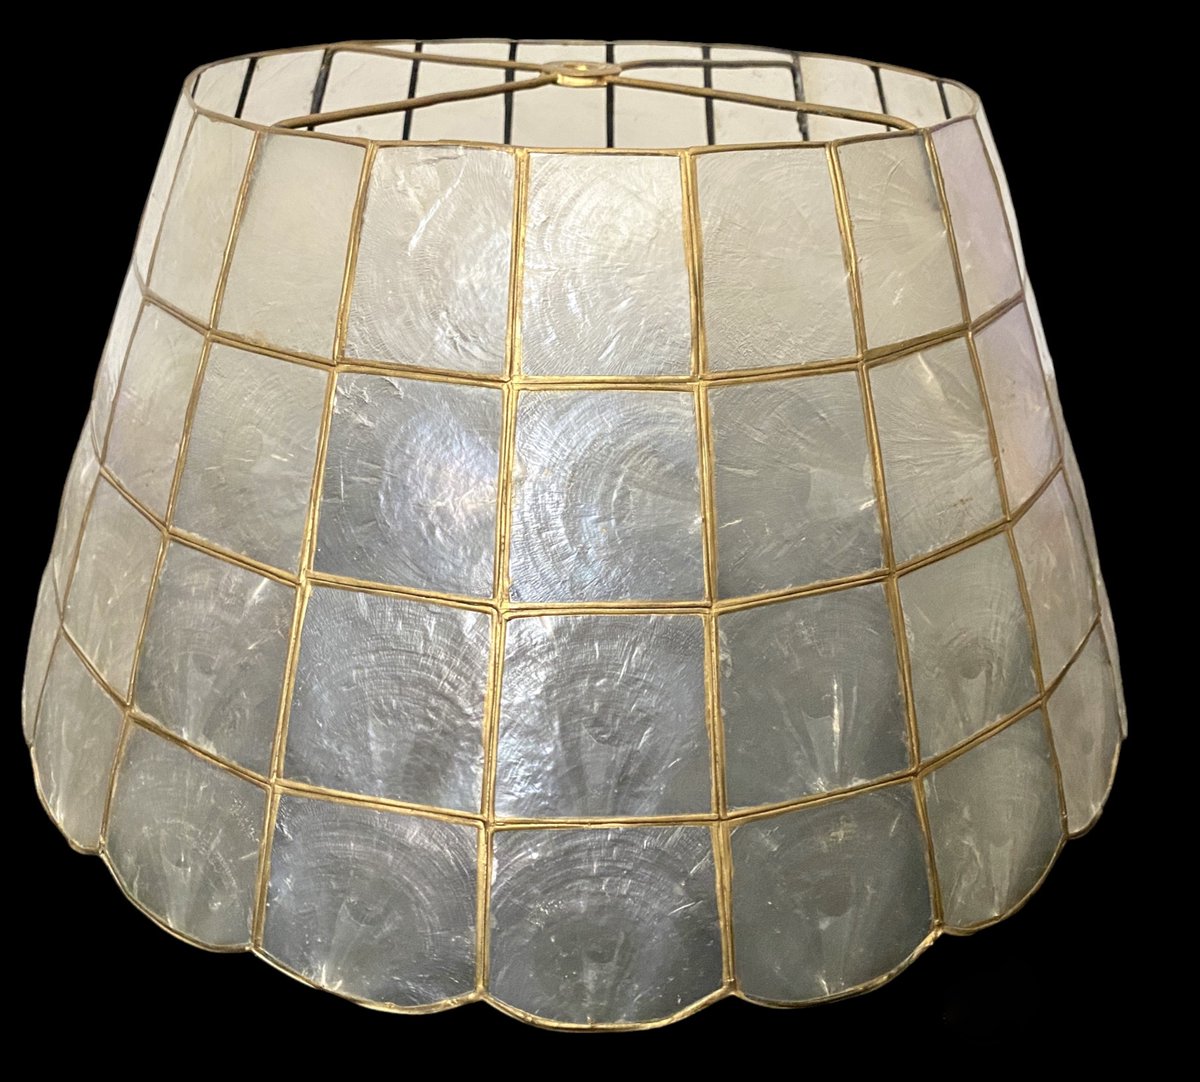 Vintage Capiz Mother of Pearl Lamp Shades Large Size 8' tall x 16' across base THREE available etsy.me/3wP6Ktz #Vintage #Capiz #Shell #MotherOfPearl #Lamp #Shades #MOP #MCM #LampShades #Retro #HomeDecor etsy.me/4aut4rH